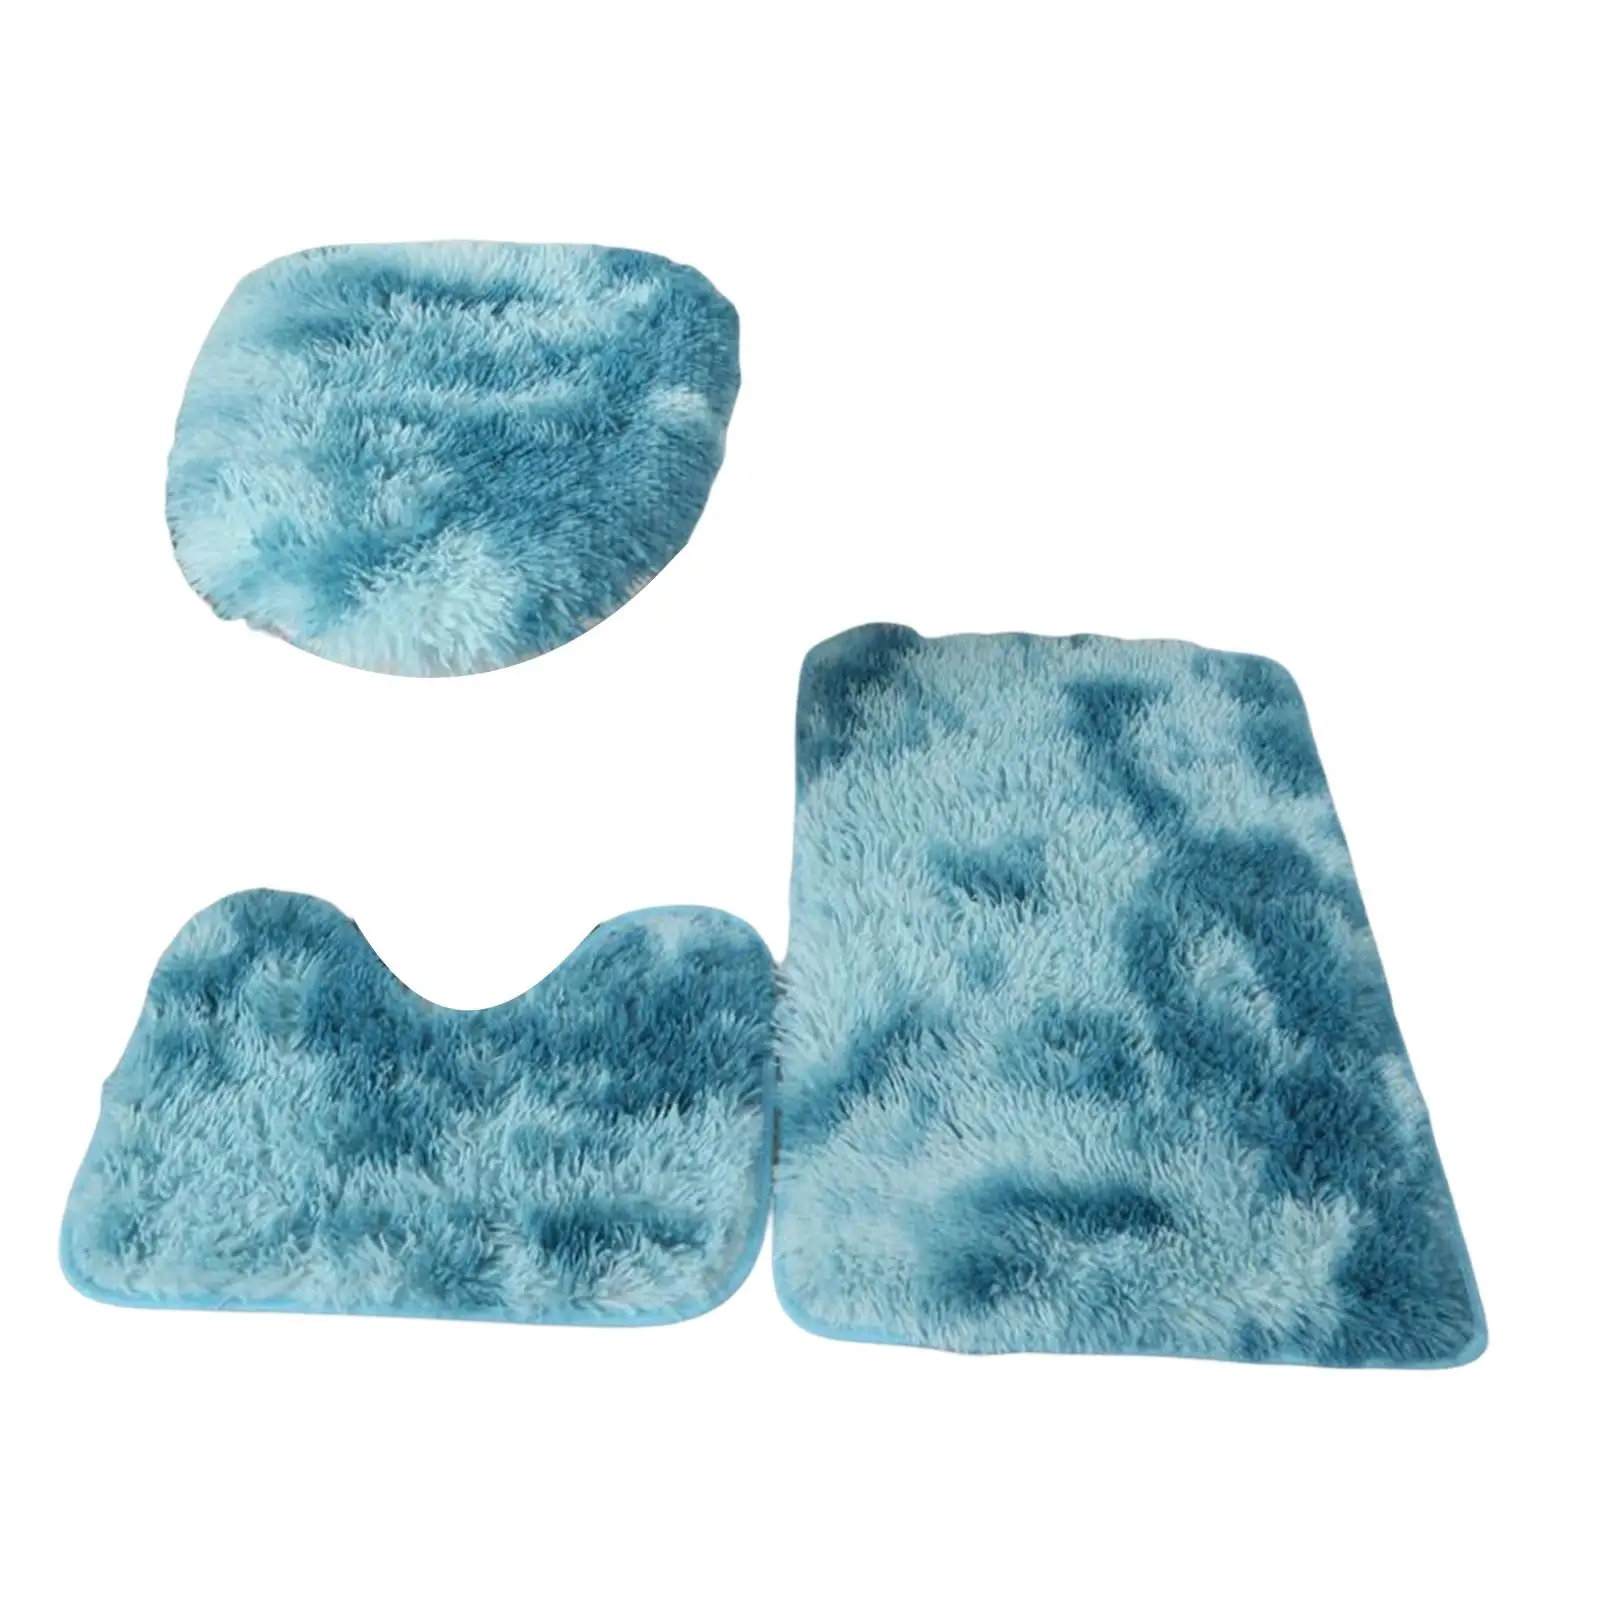 3Pcs Bathroom Rug Sets with Toilet Cover Water Absorbent Large for Bathtubs